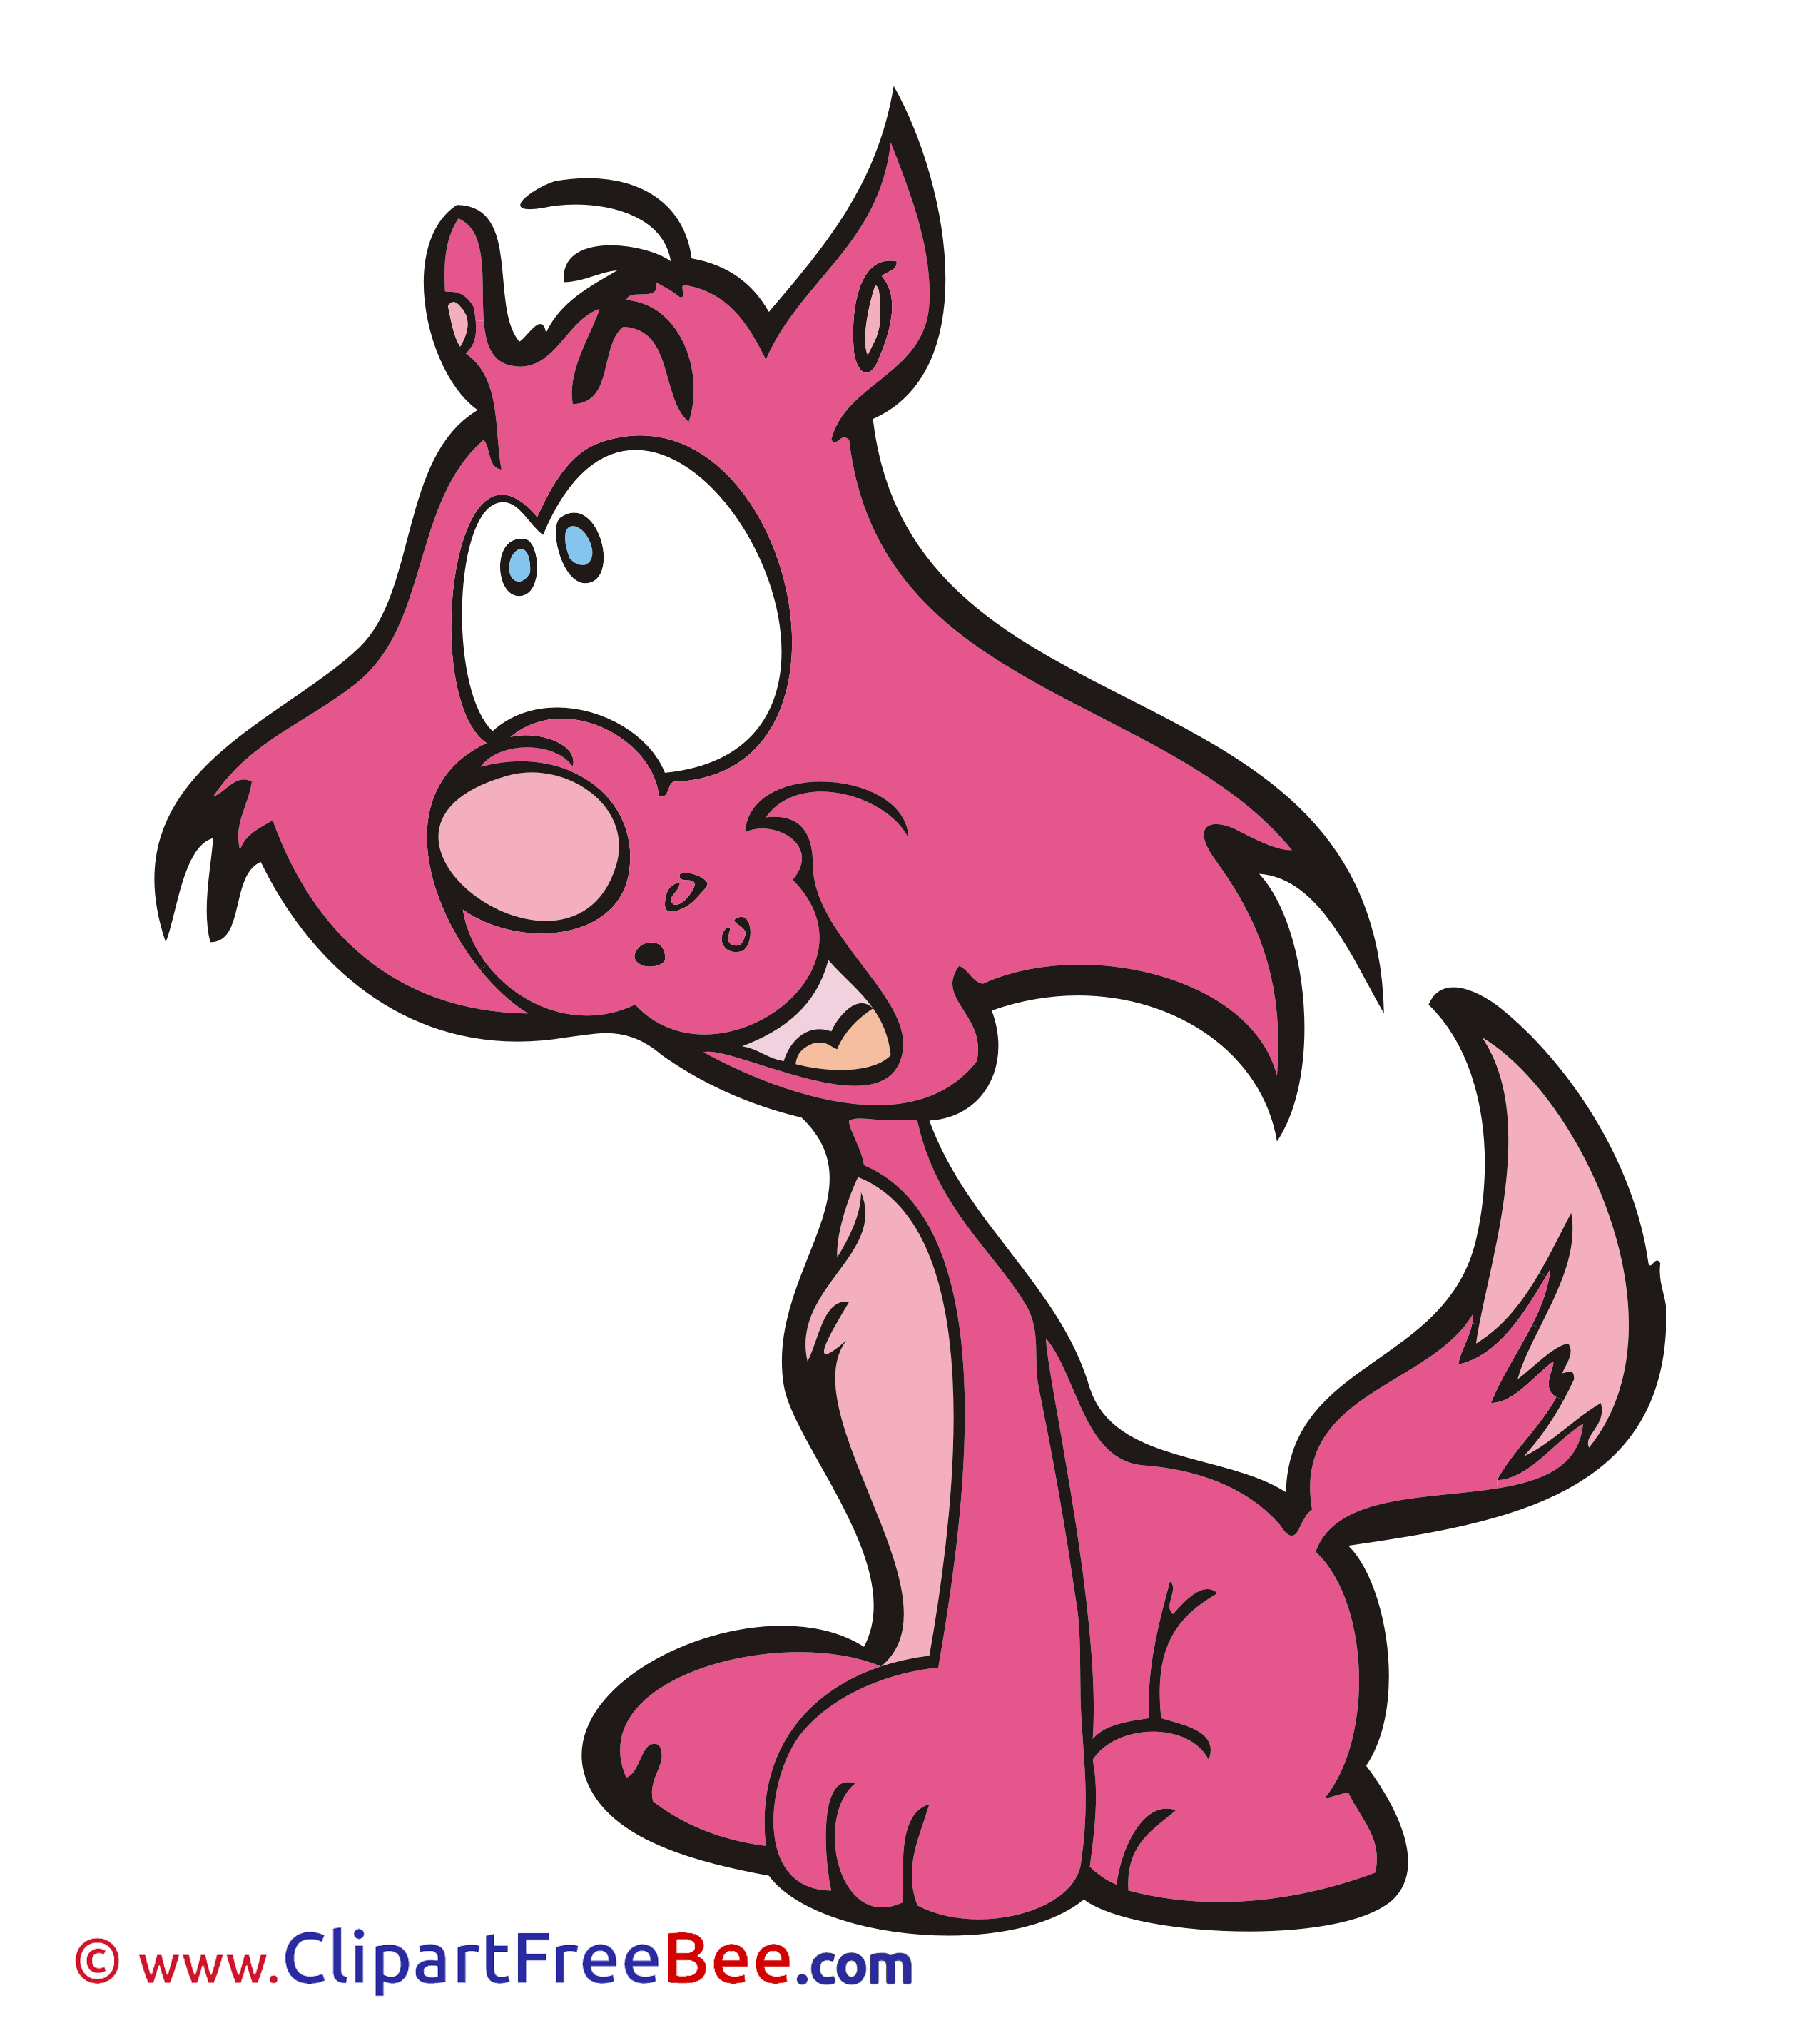 Pink Cat download Clip Art for free